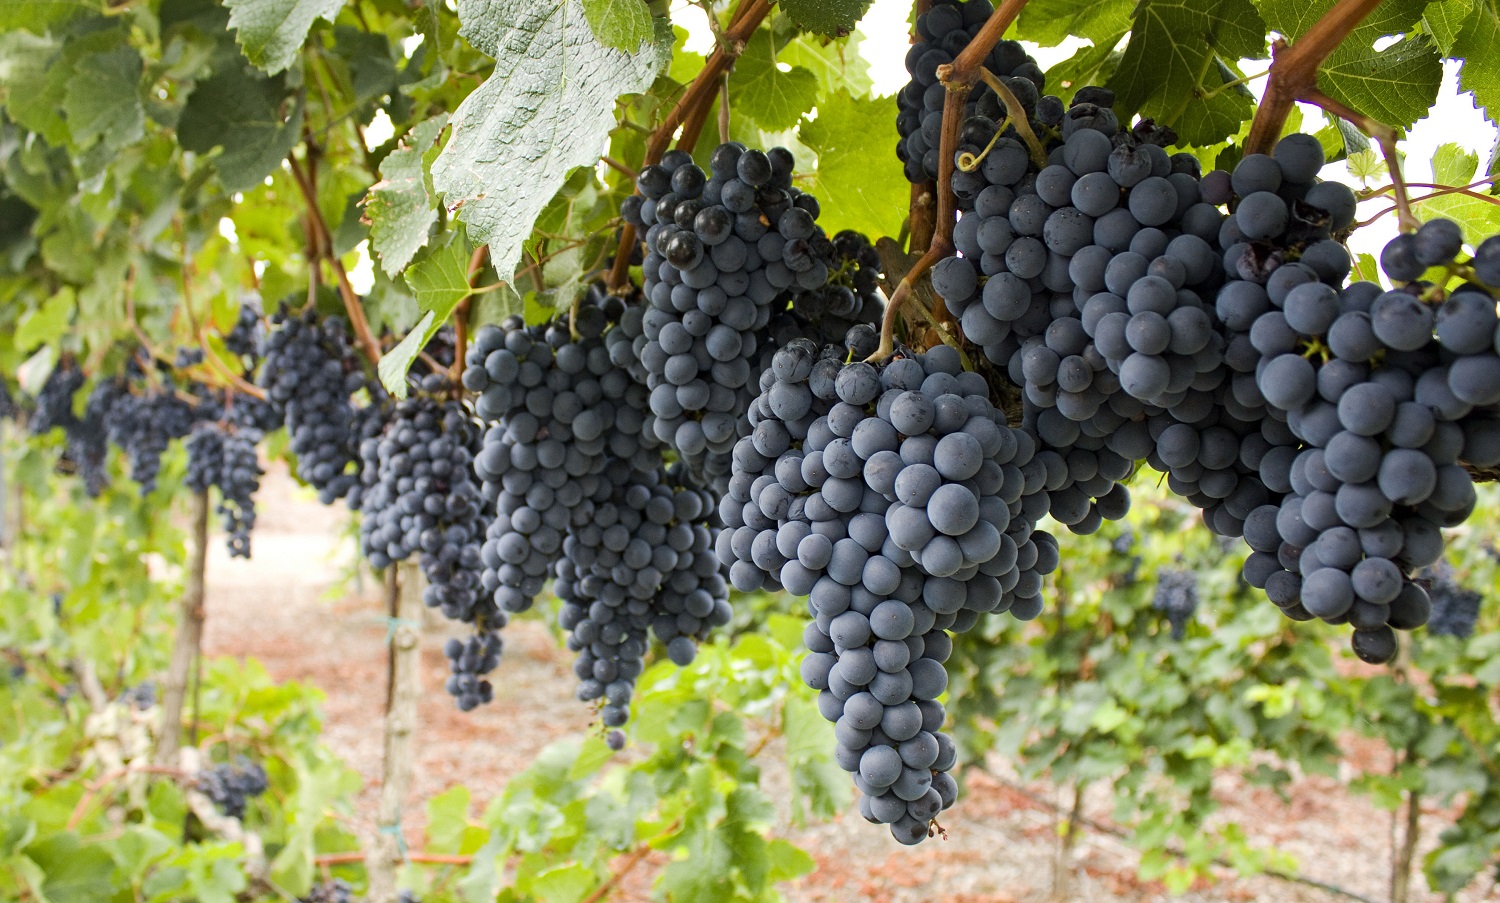 Here's what you need to know about growing grapes for wine.